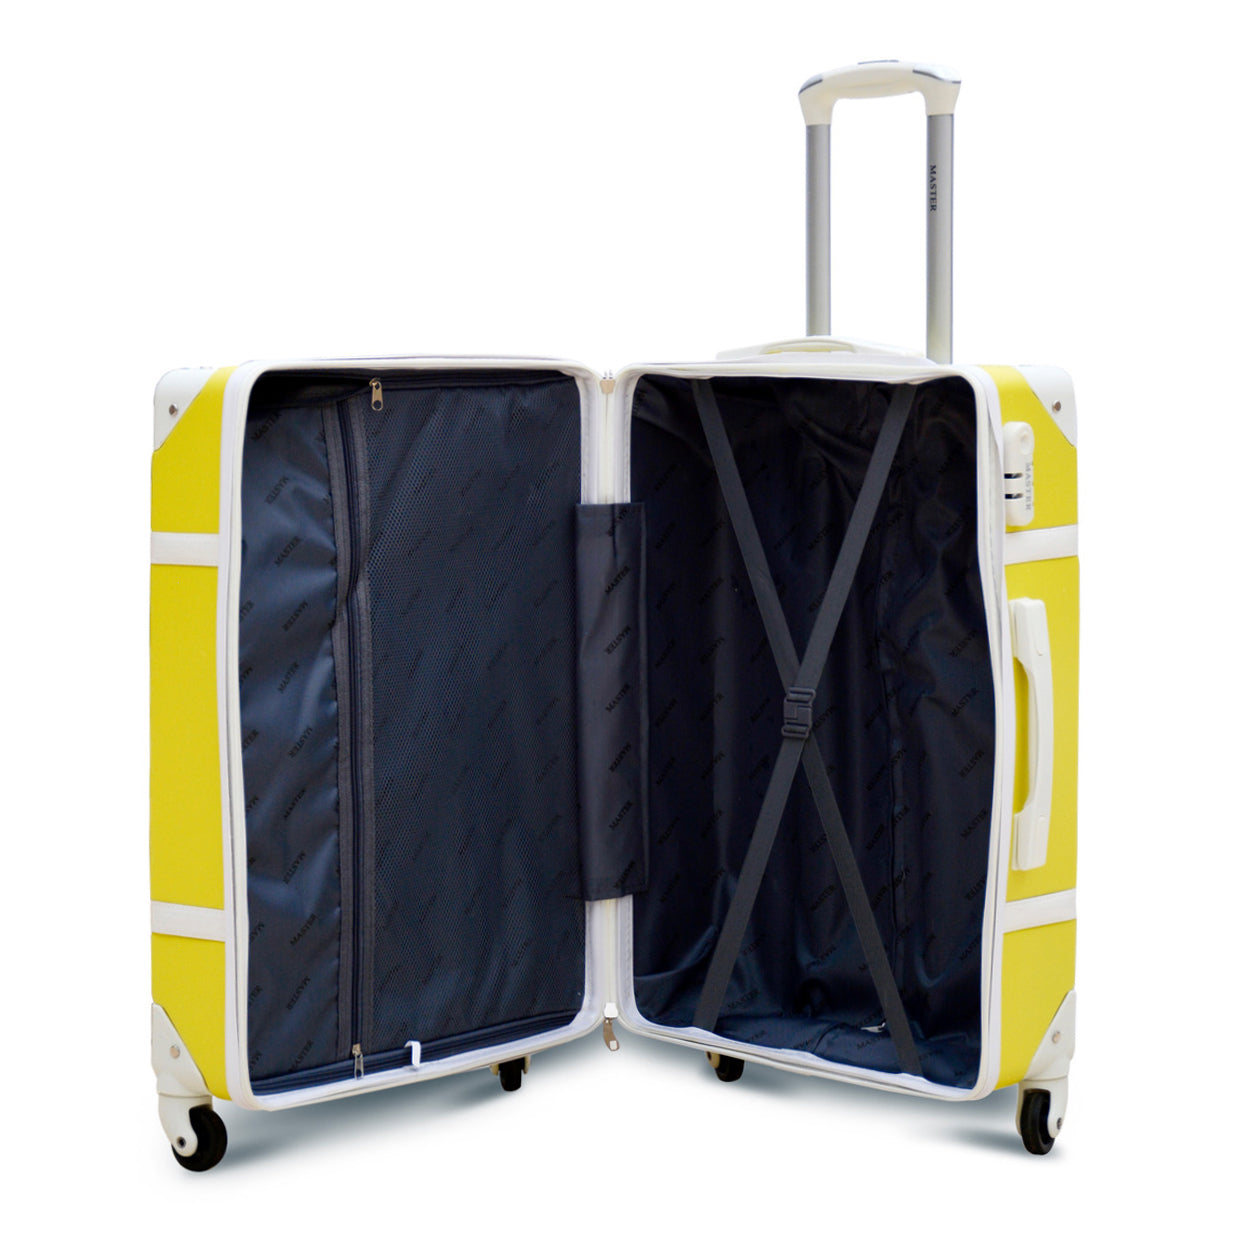 24 Inches Corner Guard Lightweight ABS Luggage Yellow Colour | Hard Case Spinner Wheel Trolley Bag